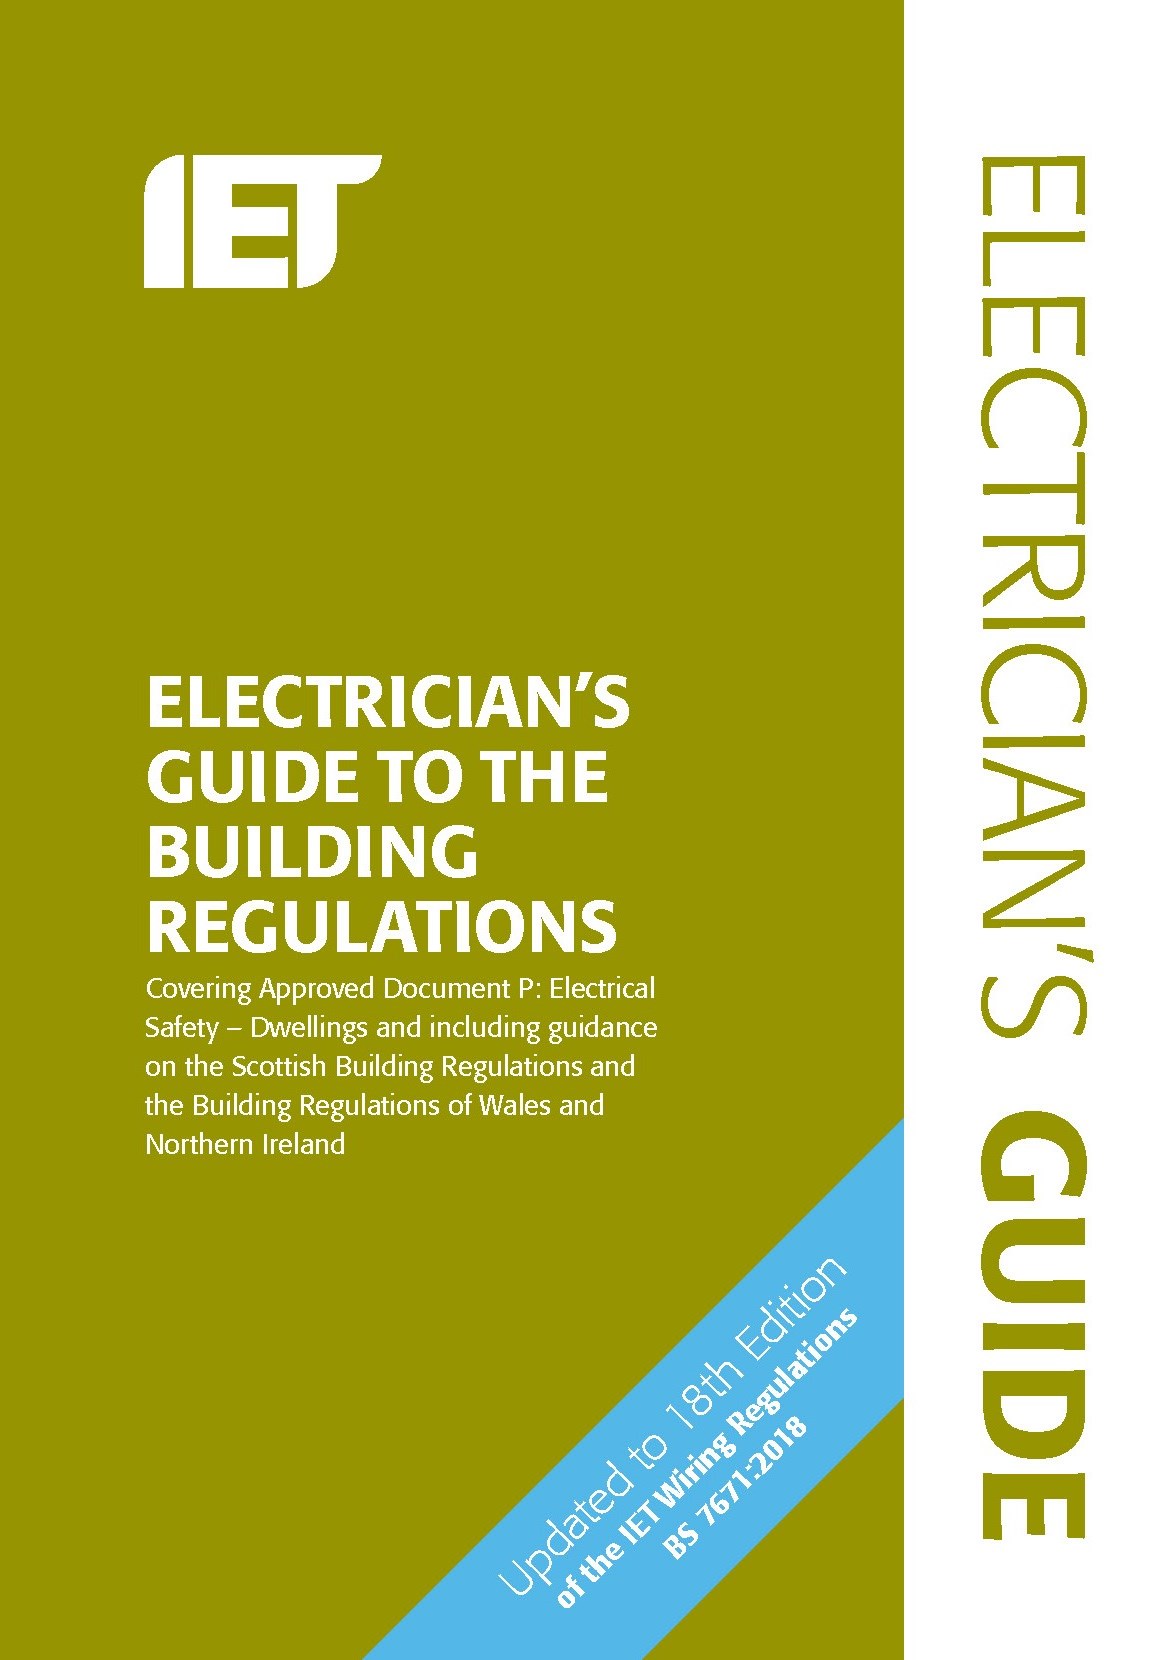 Electrician's Guide to the Building Regulations, 5th Edition